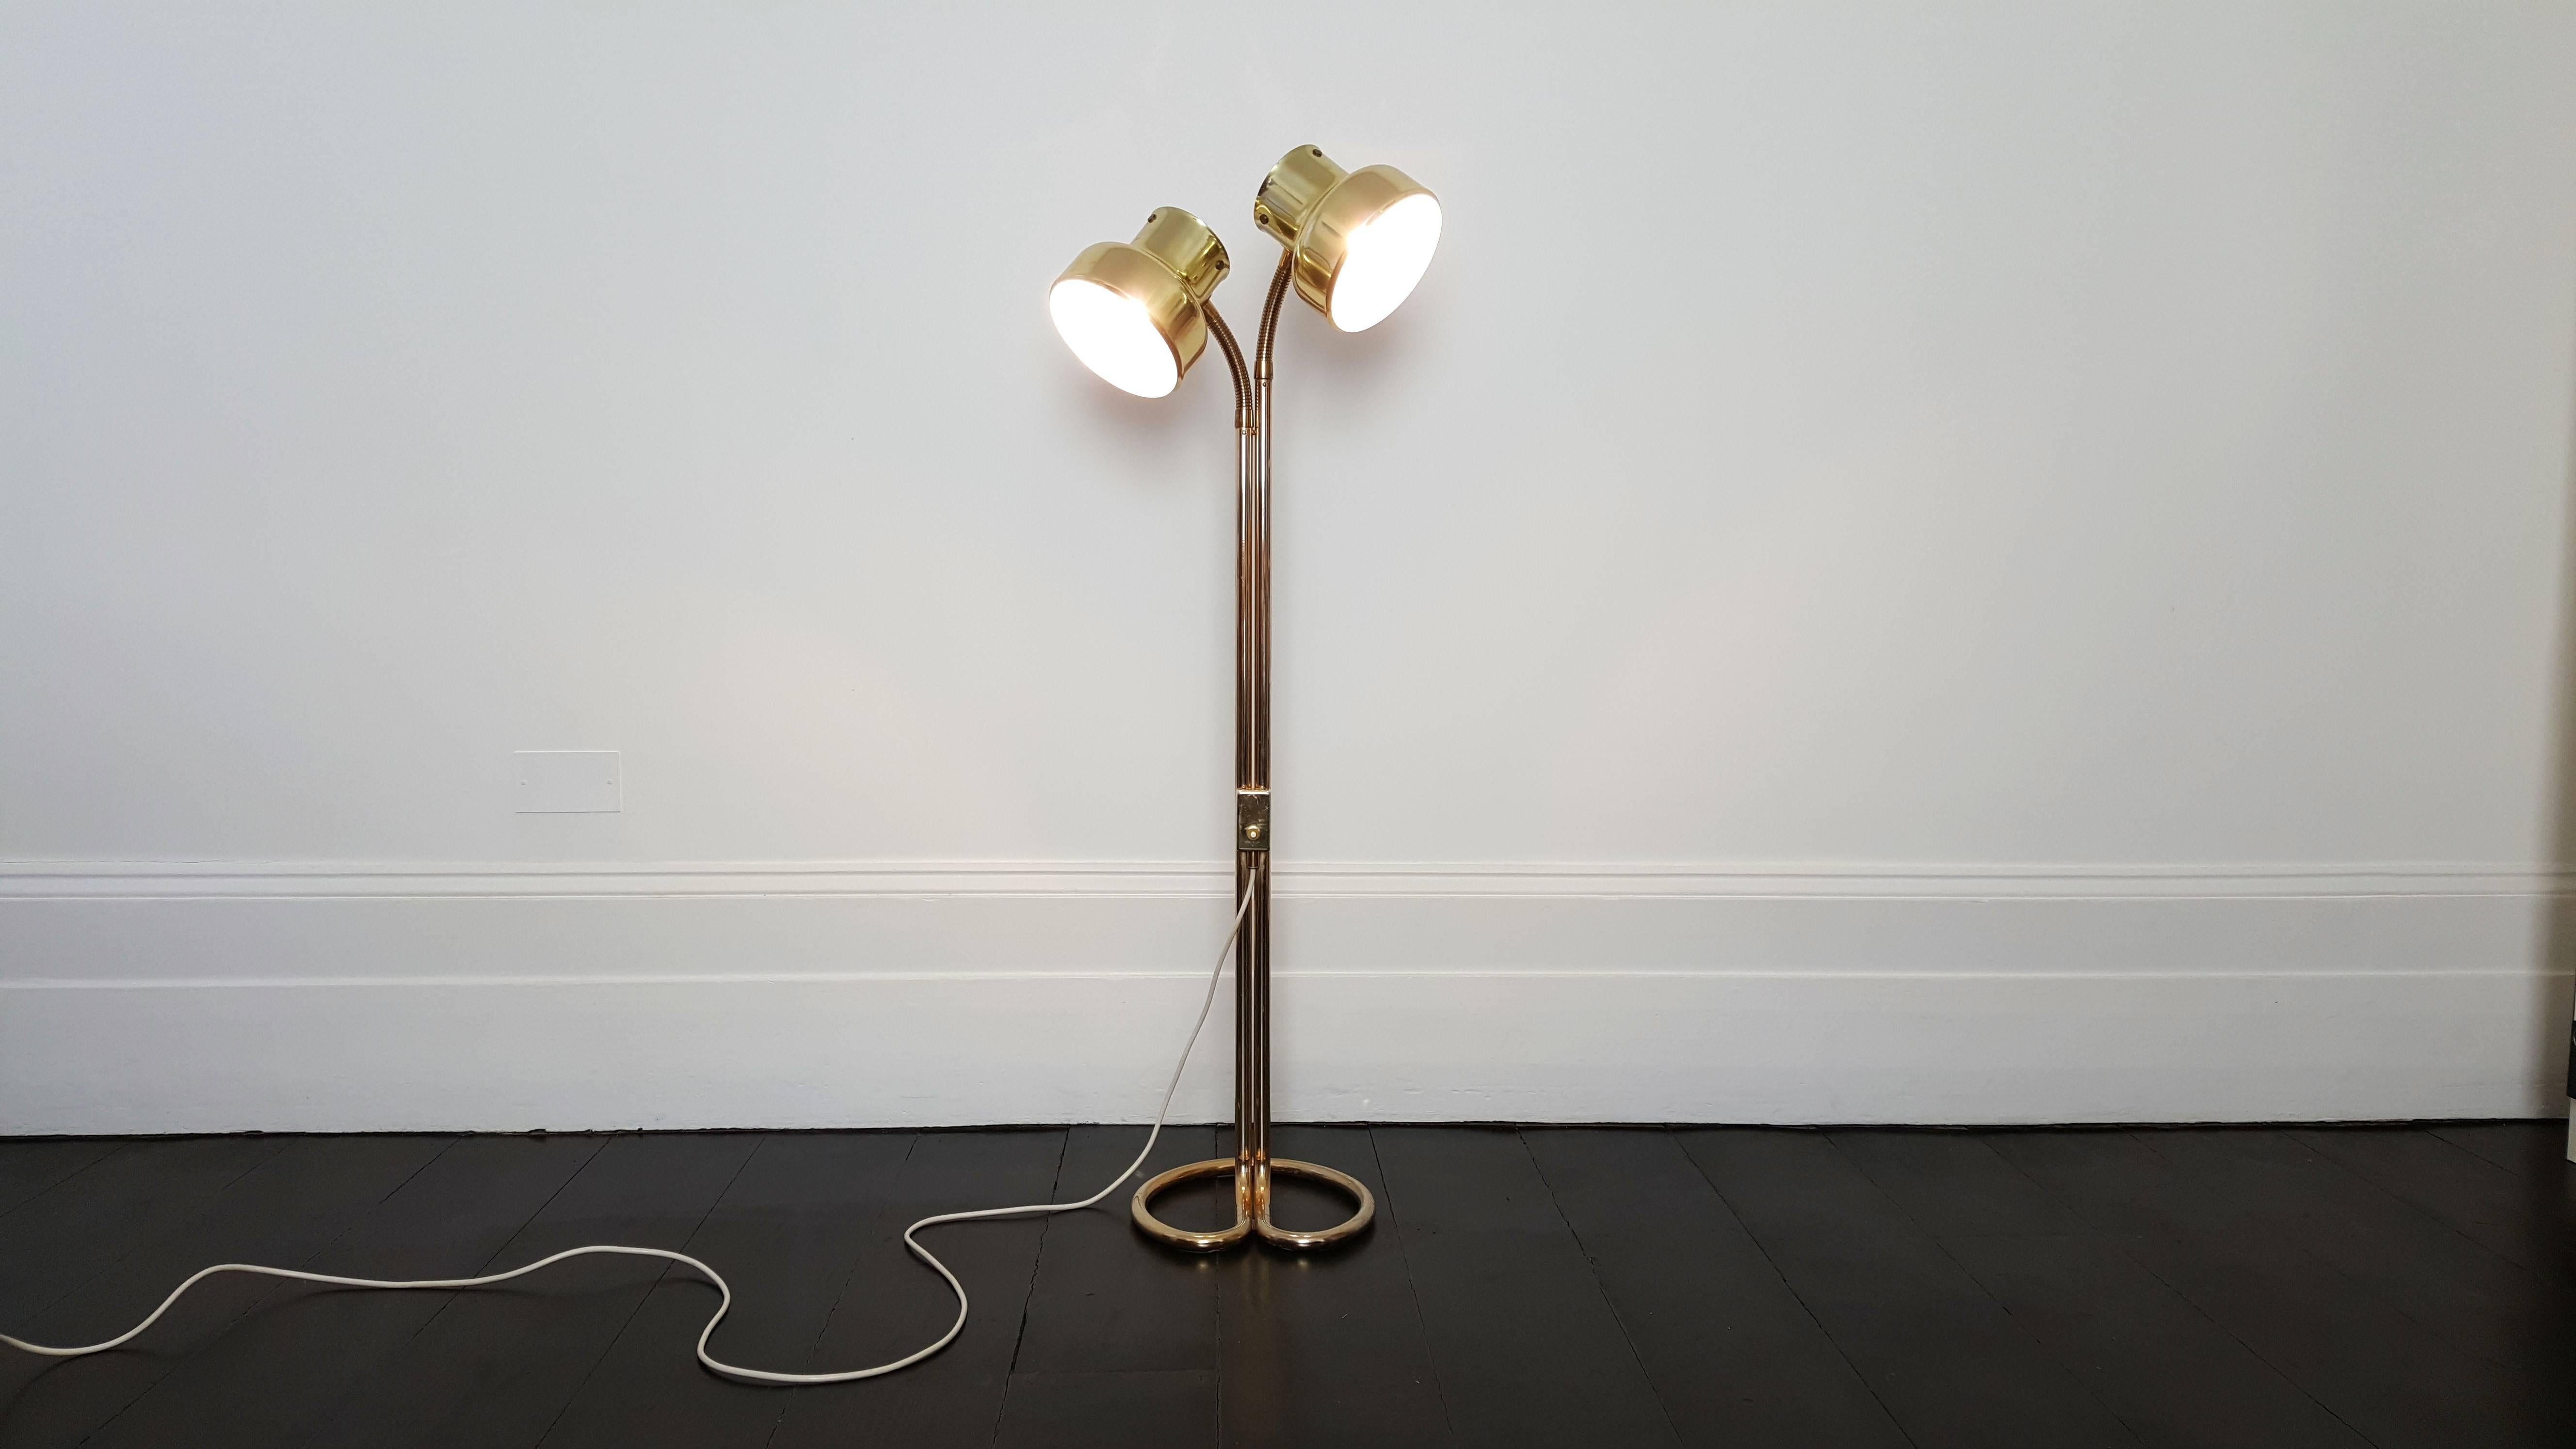 Brass double "Bumling" goose-neck floor lamp by Anders Pehrson for Ateljé Lyktan, Sweden, 1970s. 

Anders Pehrson took over the company in 1964. He would come to put his personal stamp on development in the company until the end of the